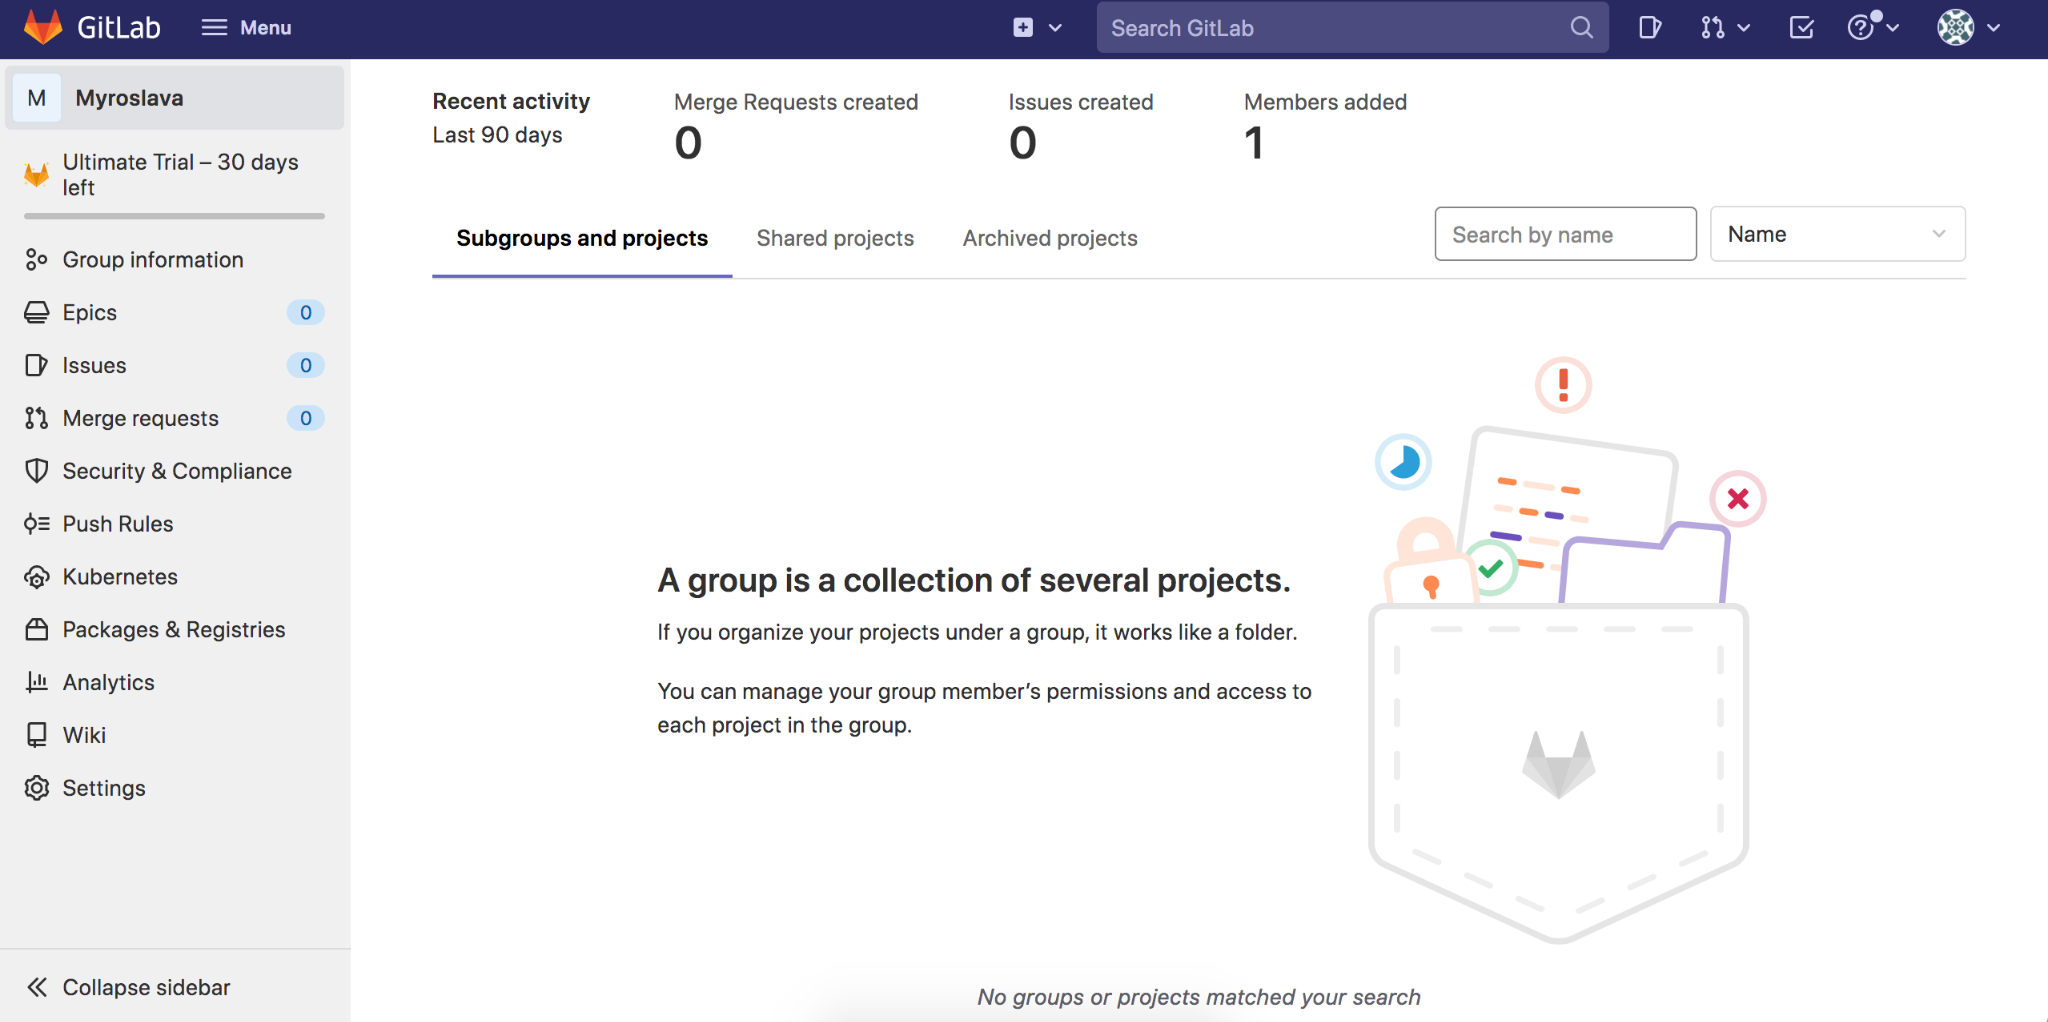 GitLab dashboard of the private account